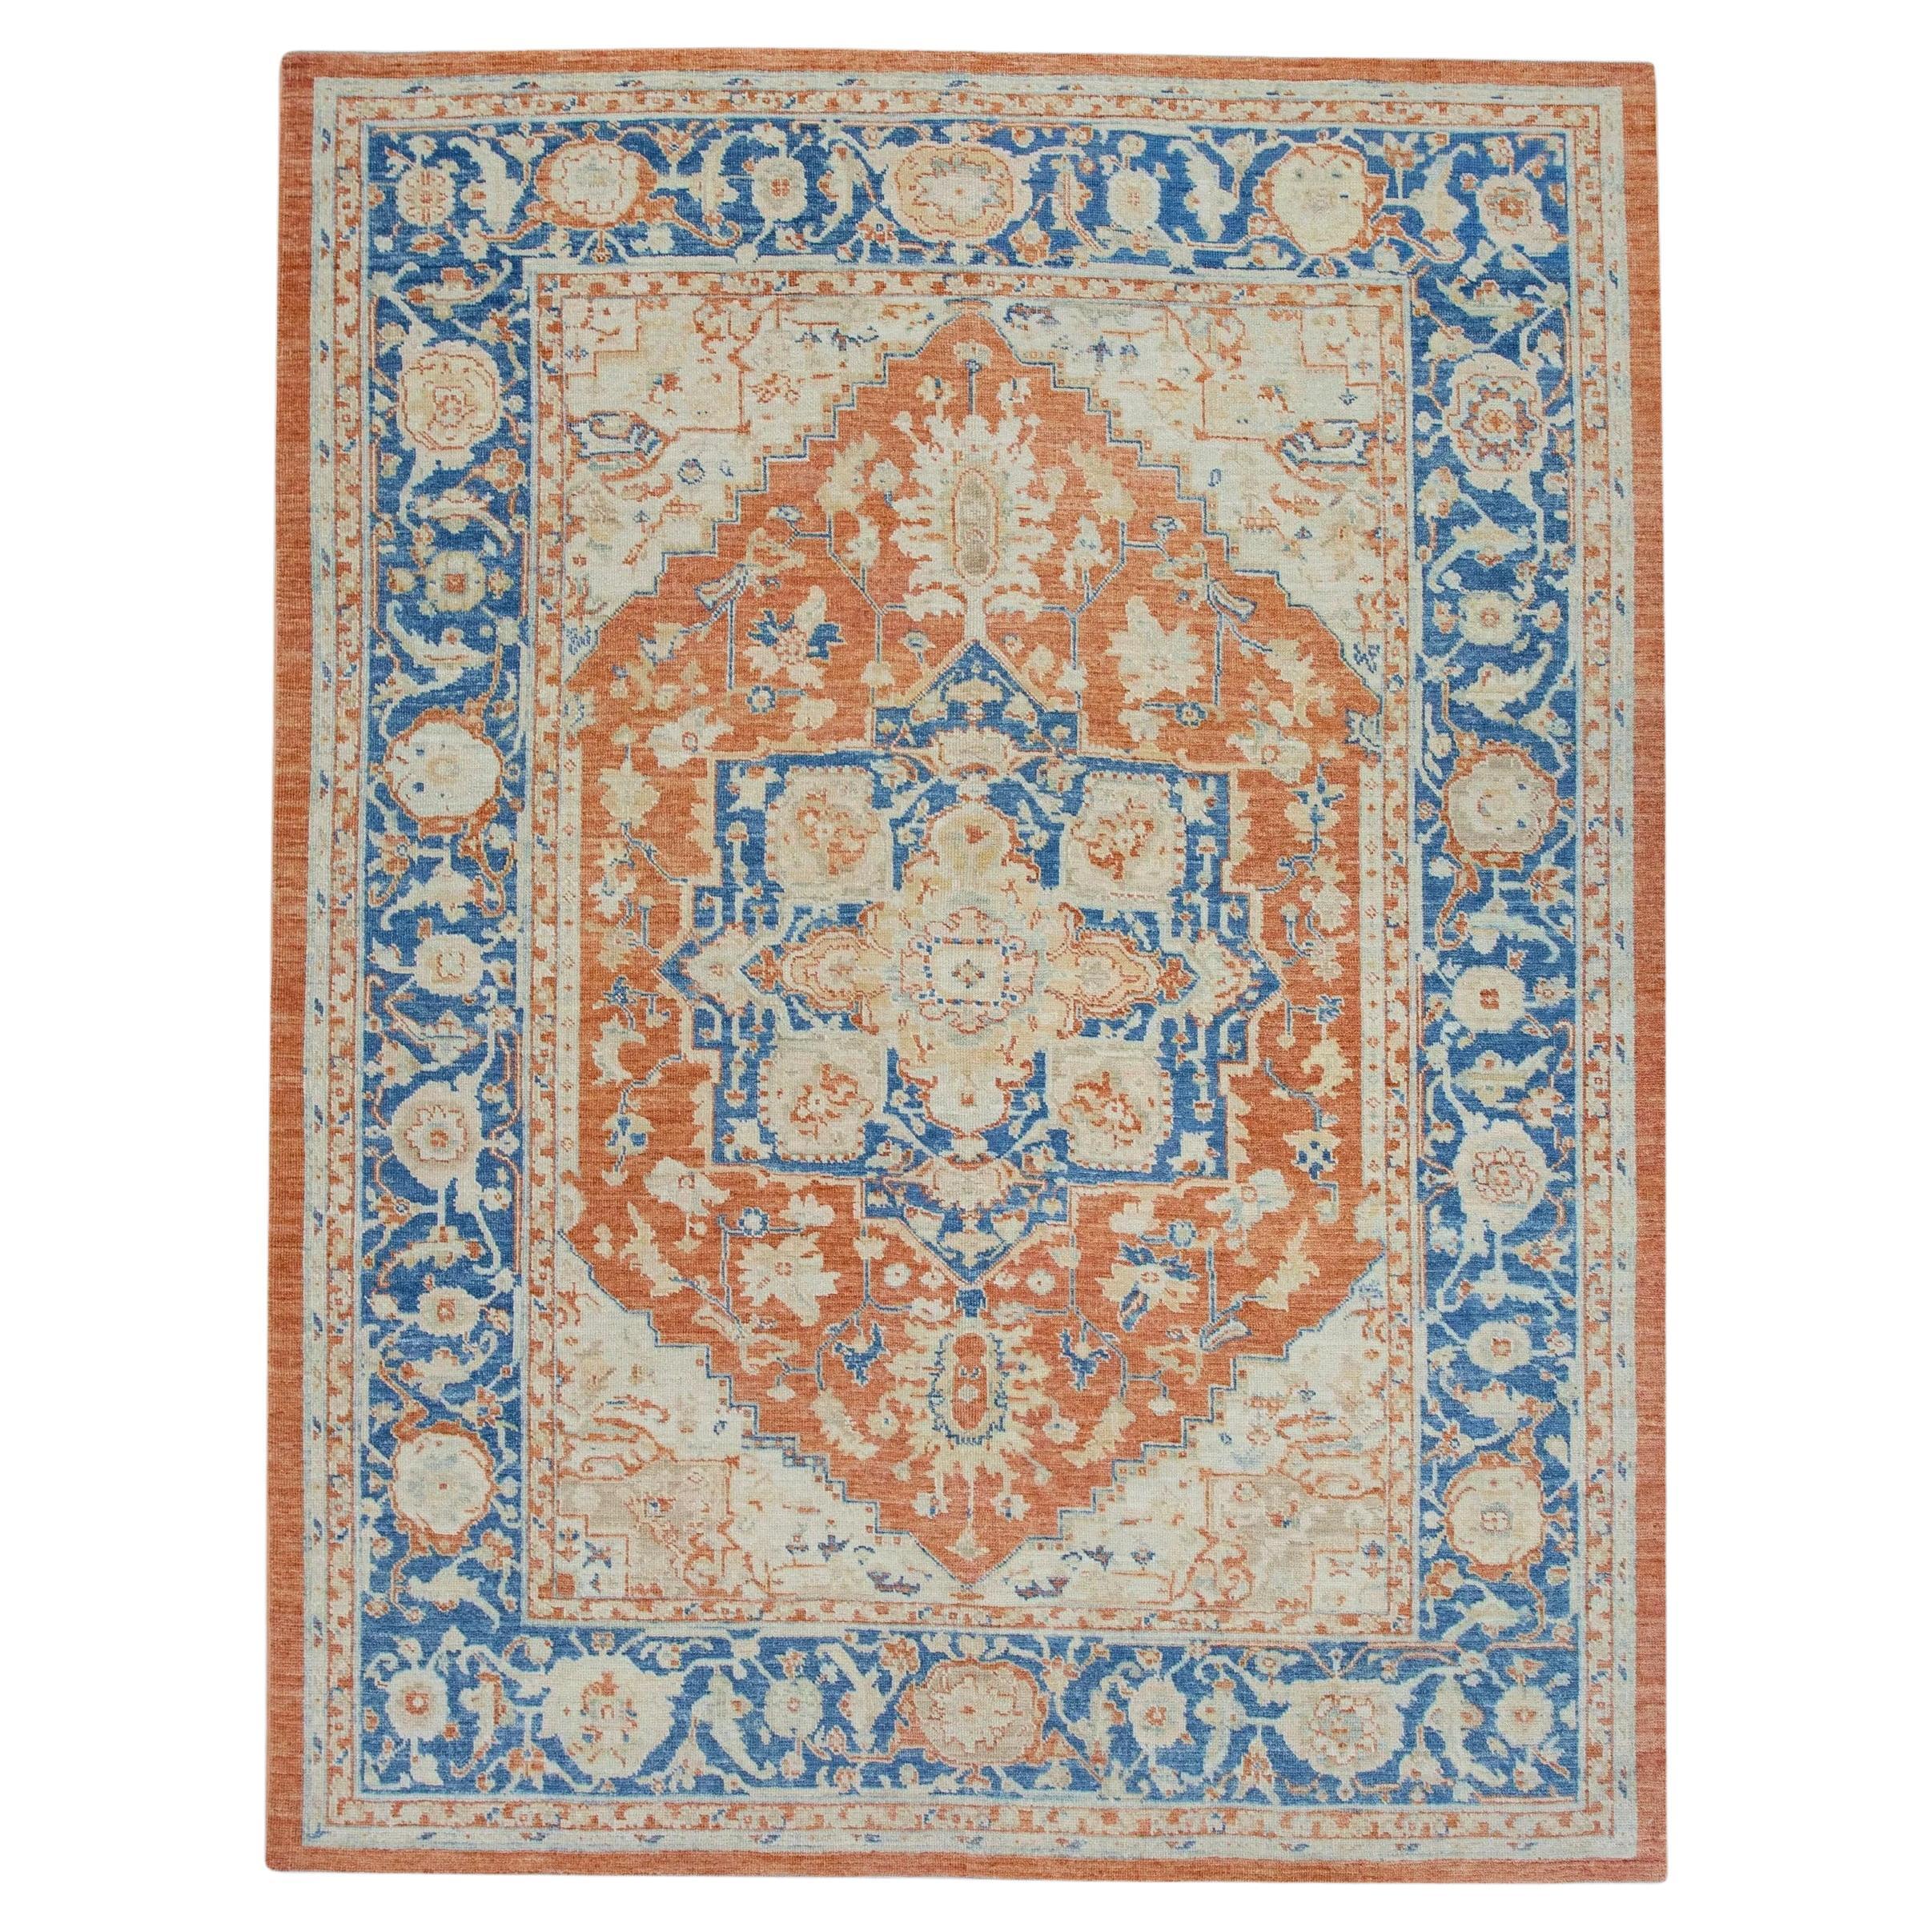 Floral Turkish Finewoven Wool Oushak Rug in Blue and Orange 6'3" x 8'1"